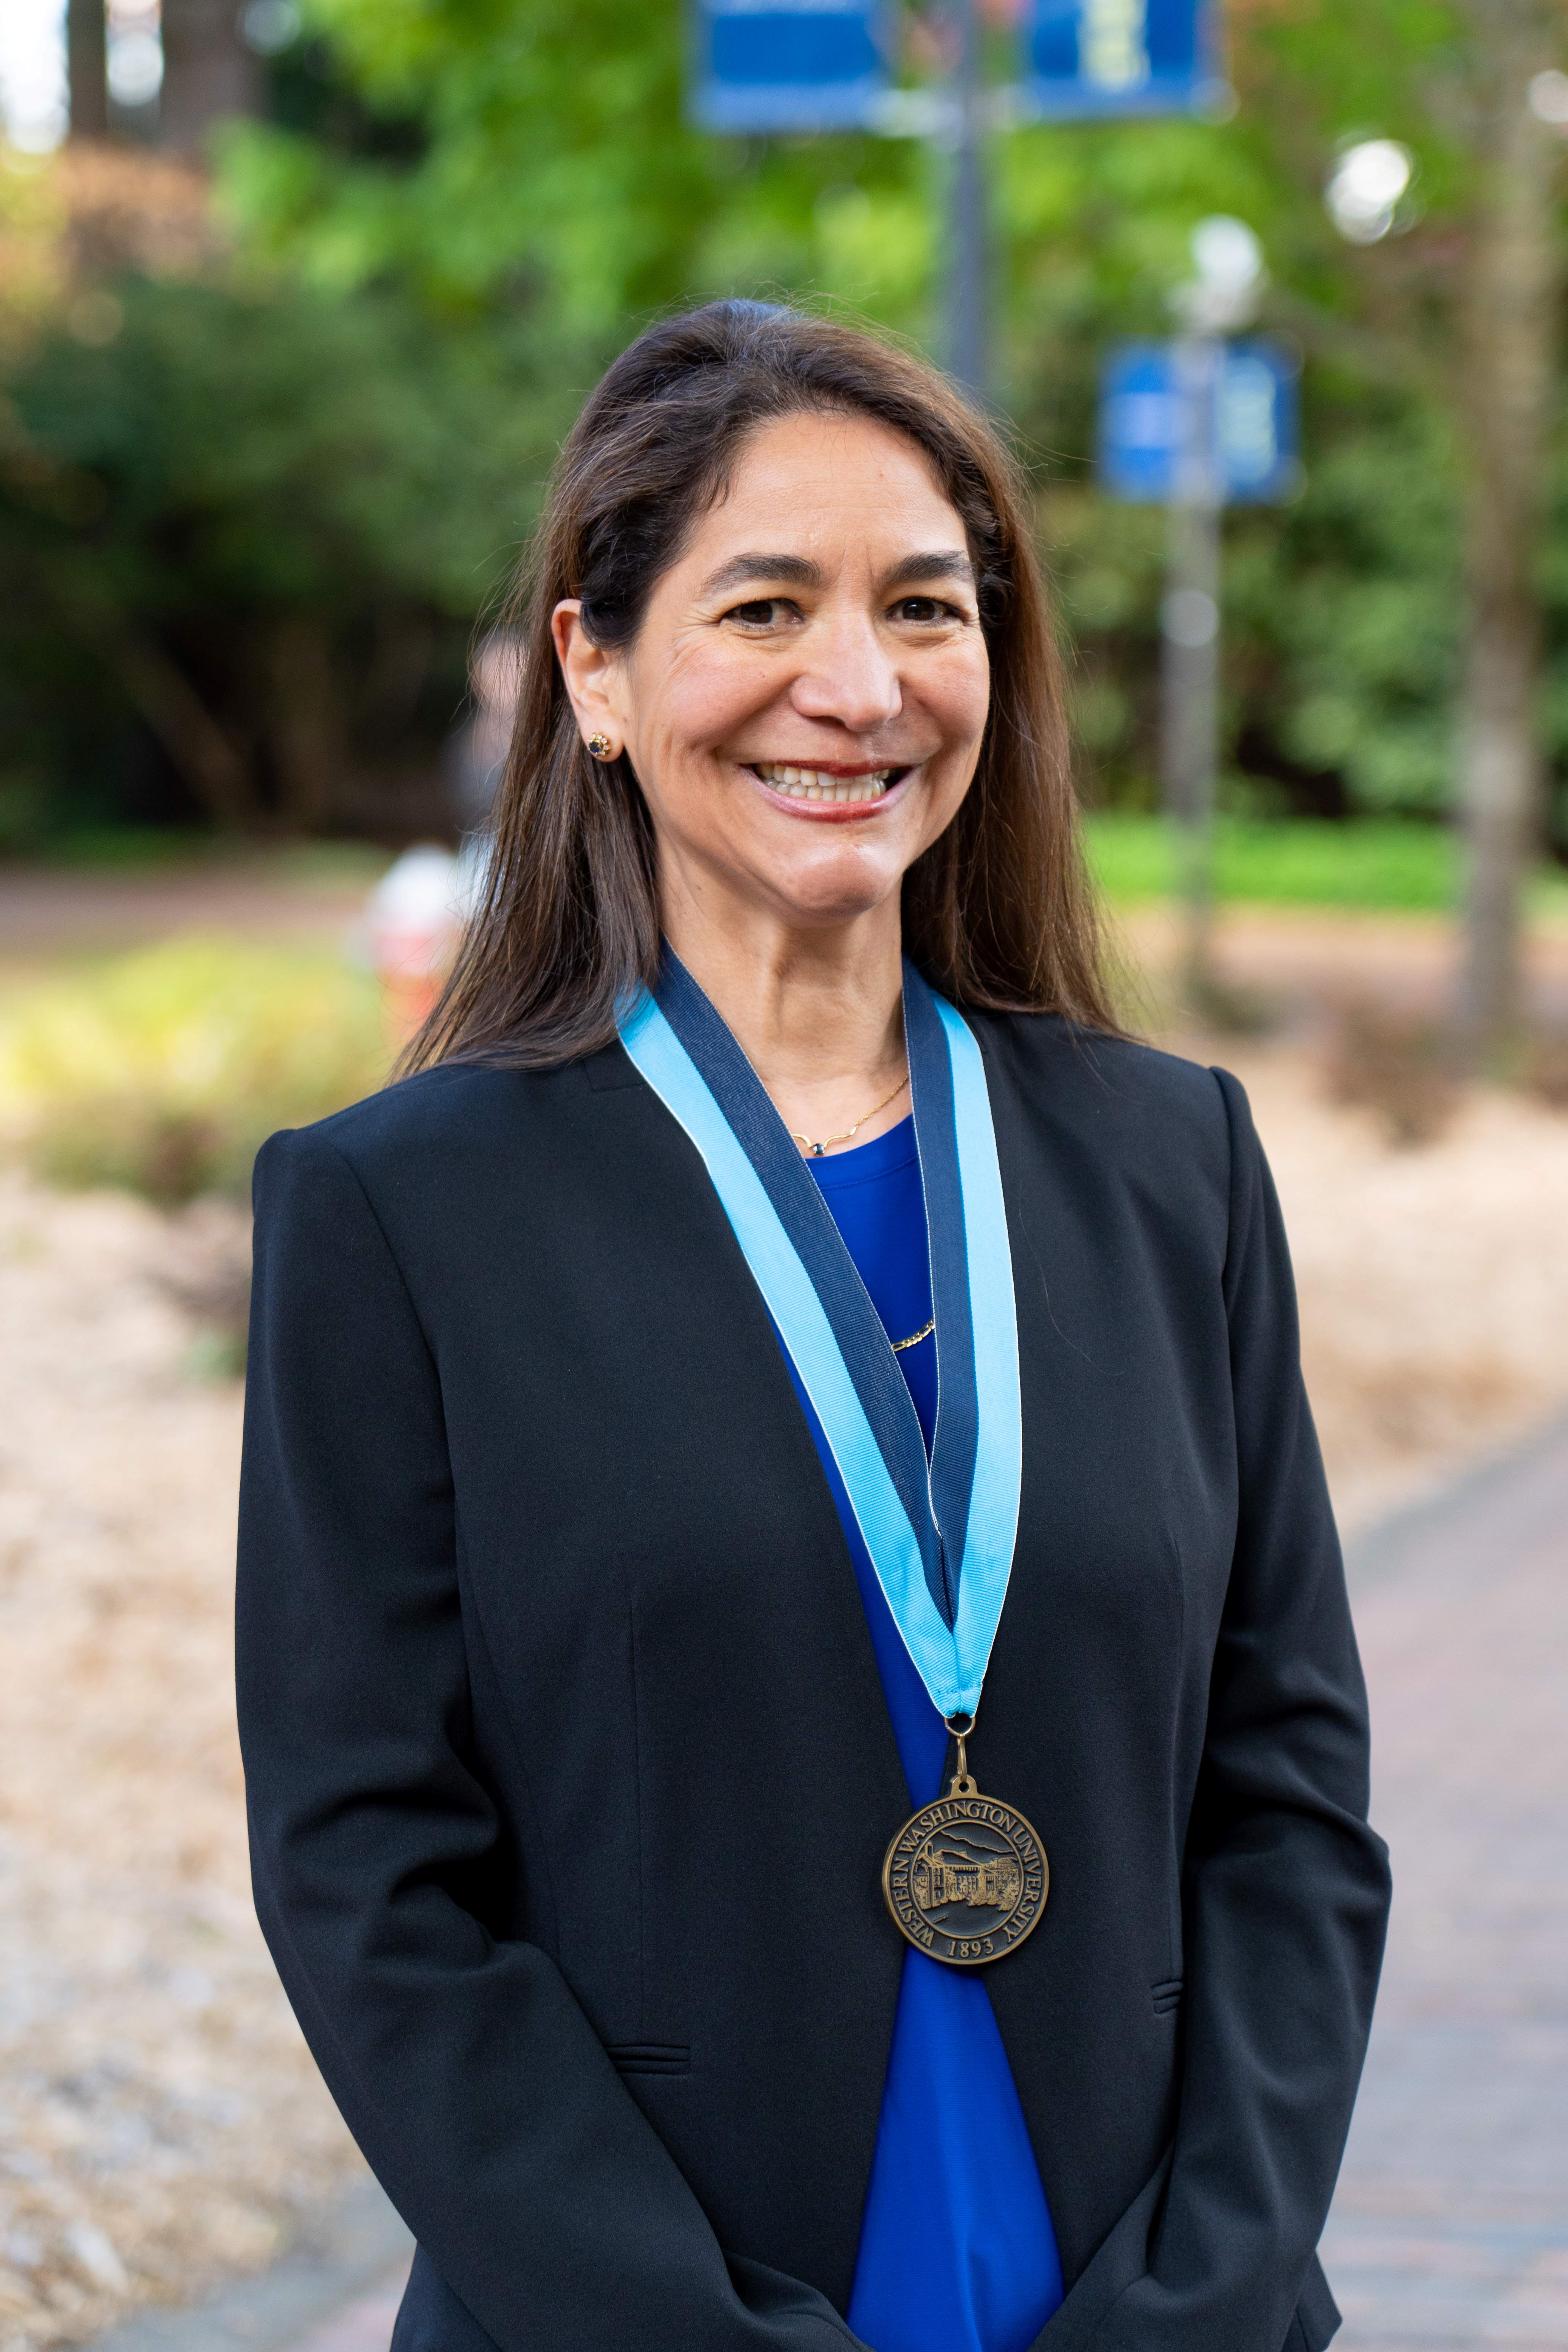 Dr. Liliana Deck stands in front of Old Main with a broad smile and wearing a WWU award medallion